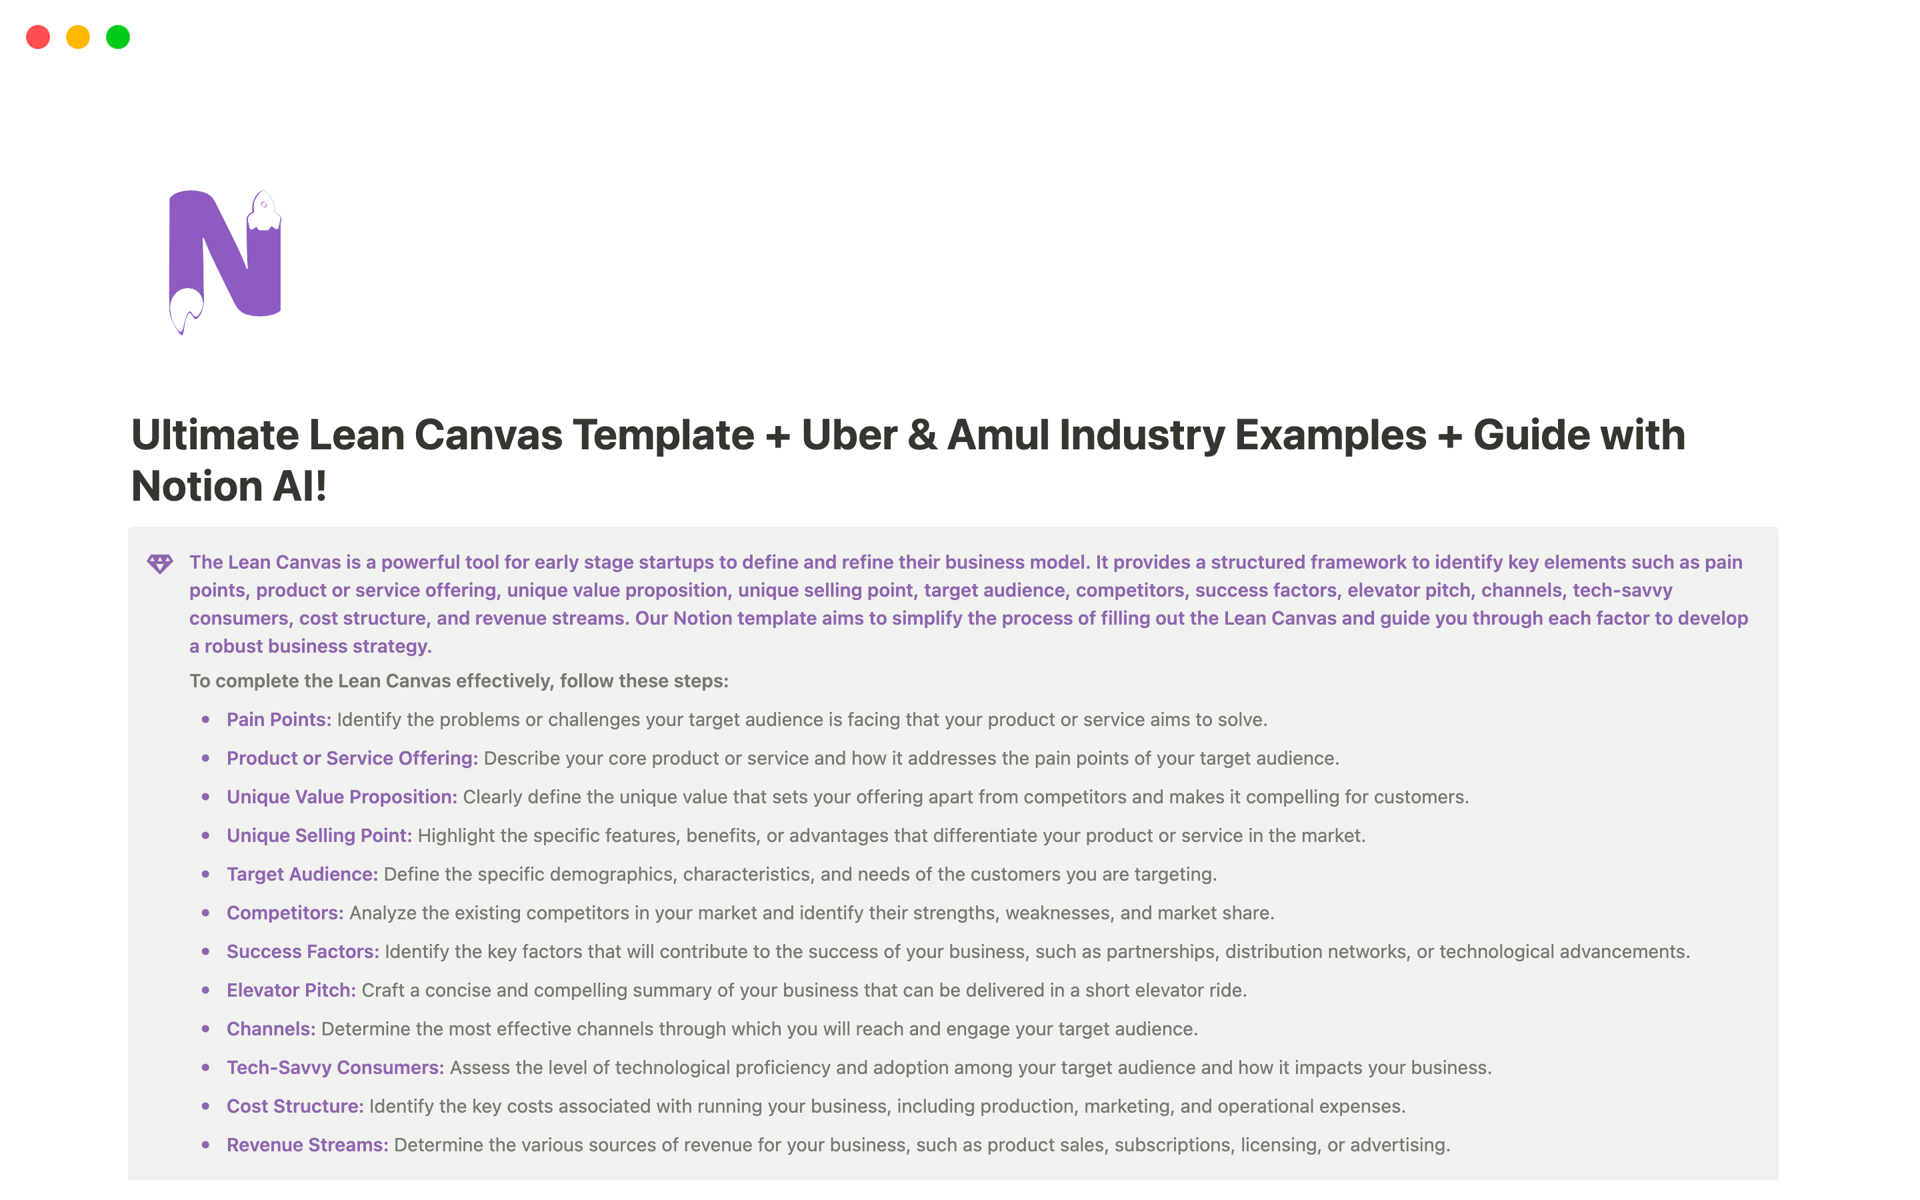 Ultimate Lean Canvas with examples of Uber & Amulのテンプレートのプレビュー